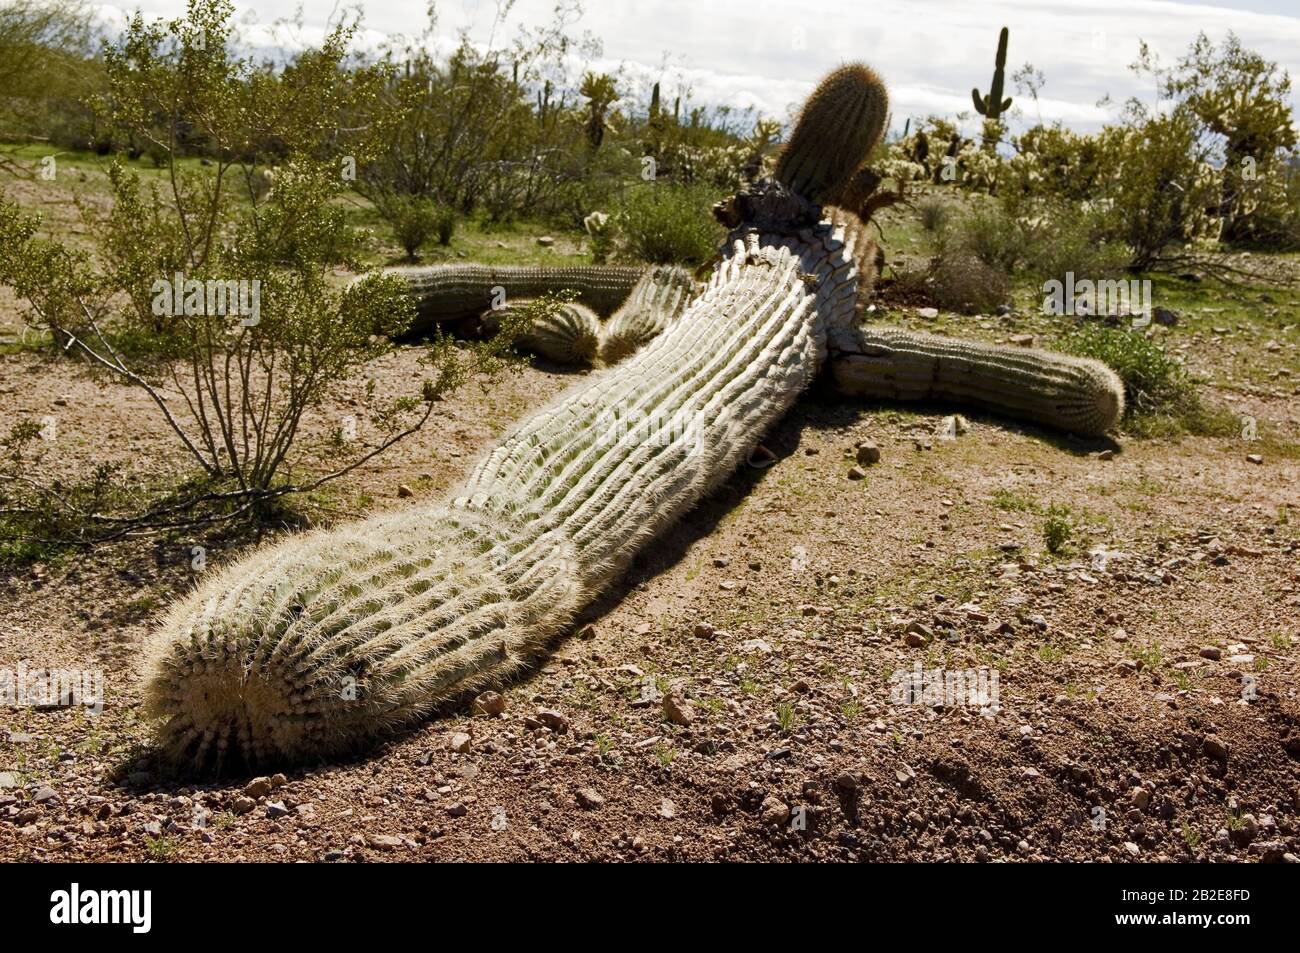 A giant Saguaro Cactus toppled over by the high winds of an Arizona Monsoon storm from the night before. Stock Photo